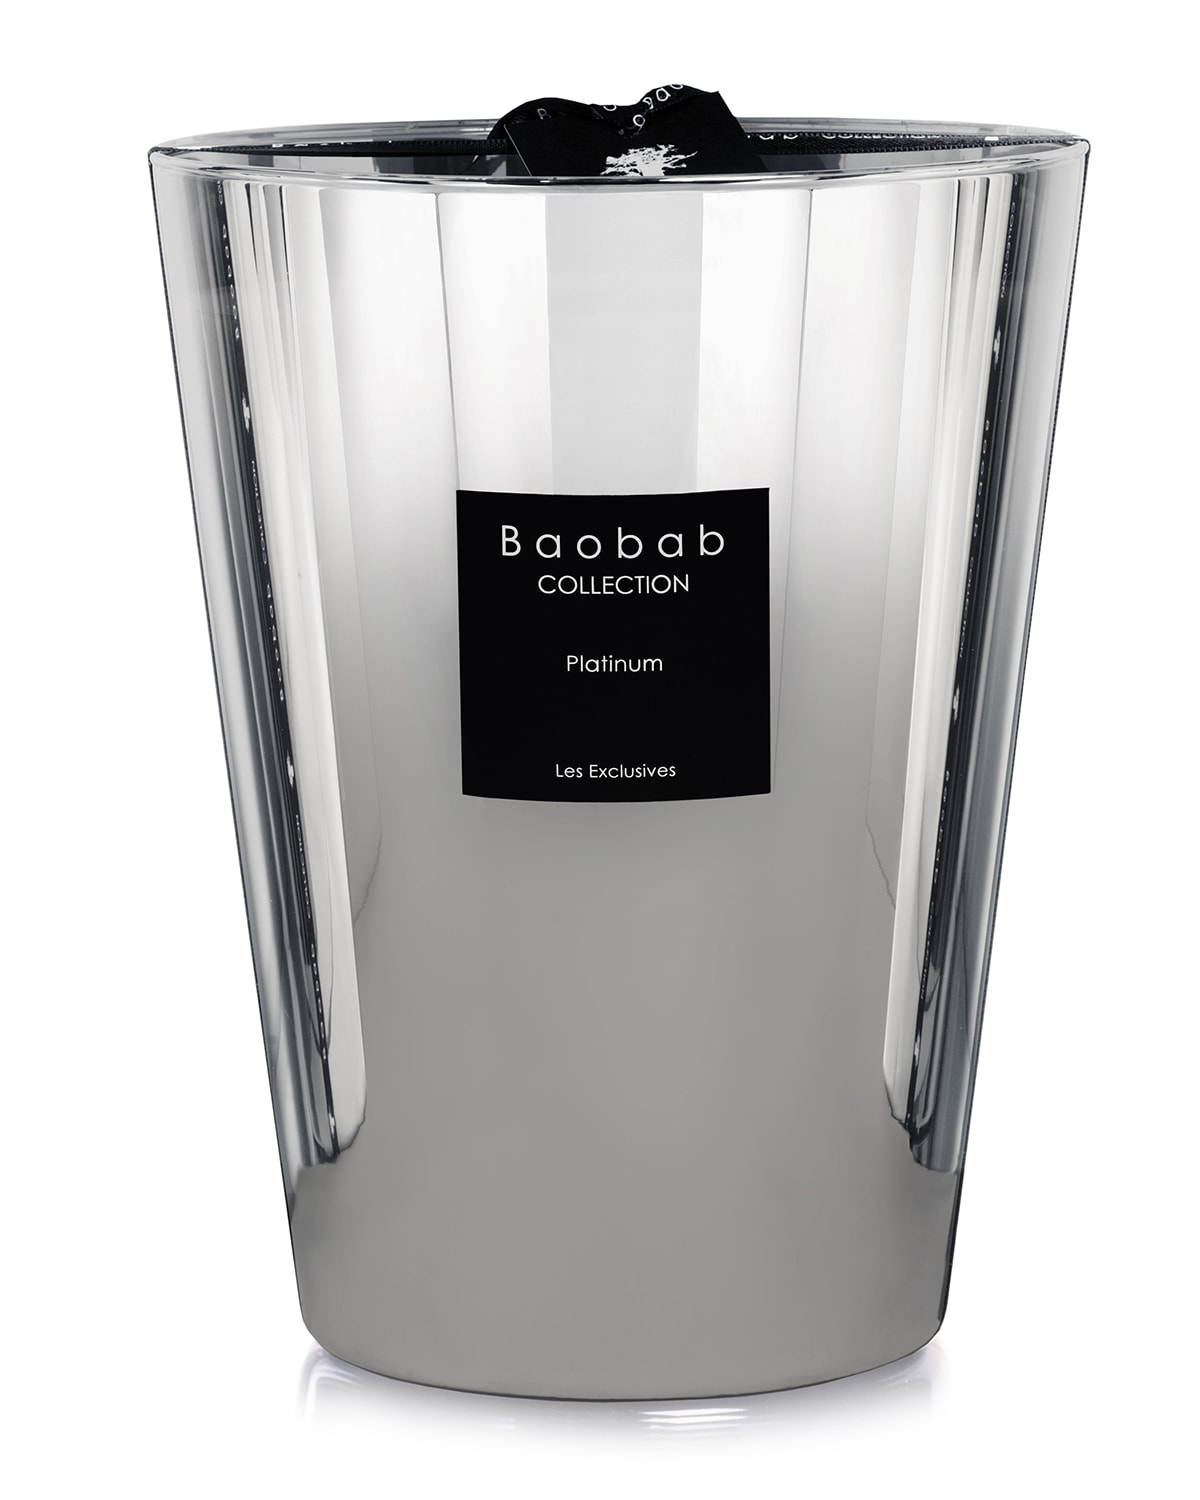 Baobab Collection Les Exclusives Platinum Scented Candle, 9.4" In Metallic